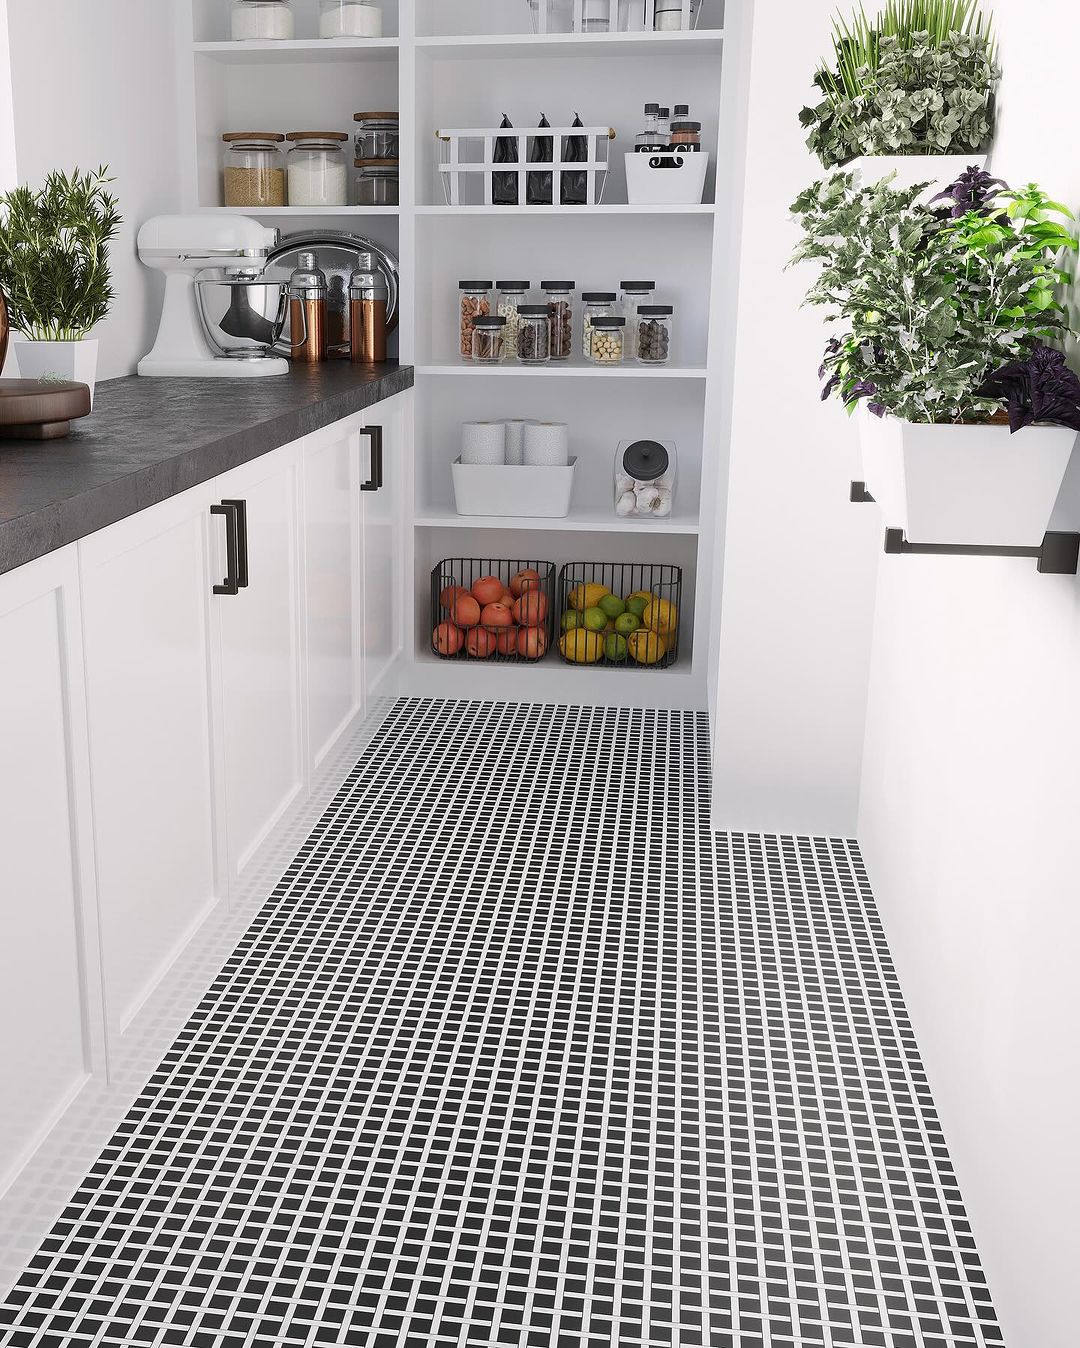 Monochrome Magic: Shaker Style in a Streamlined Pantry